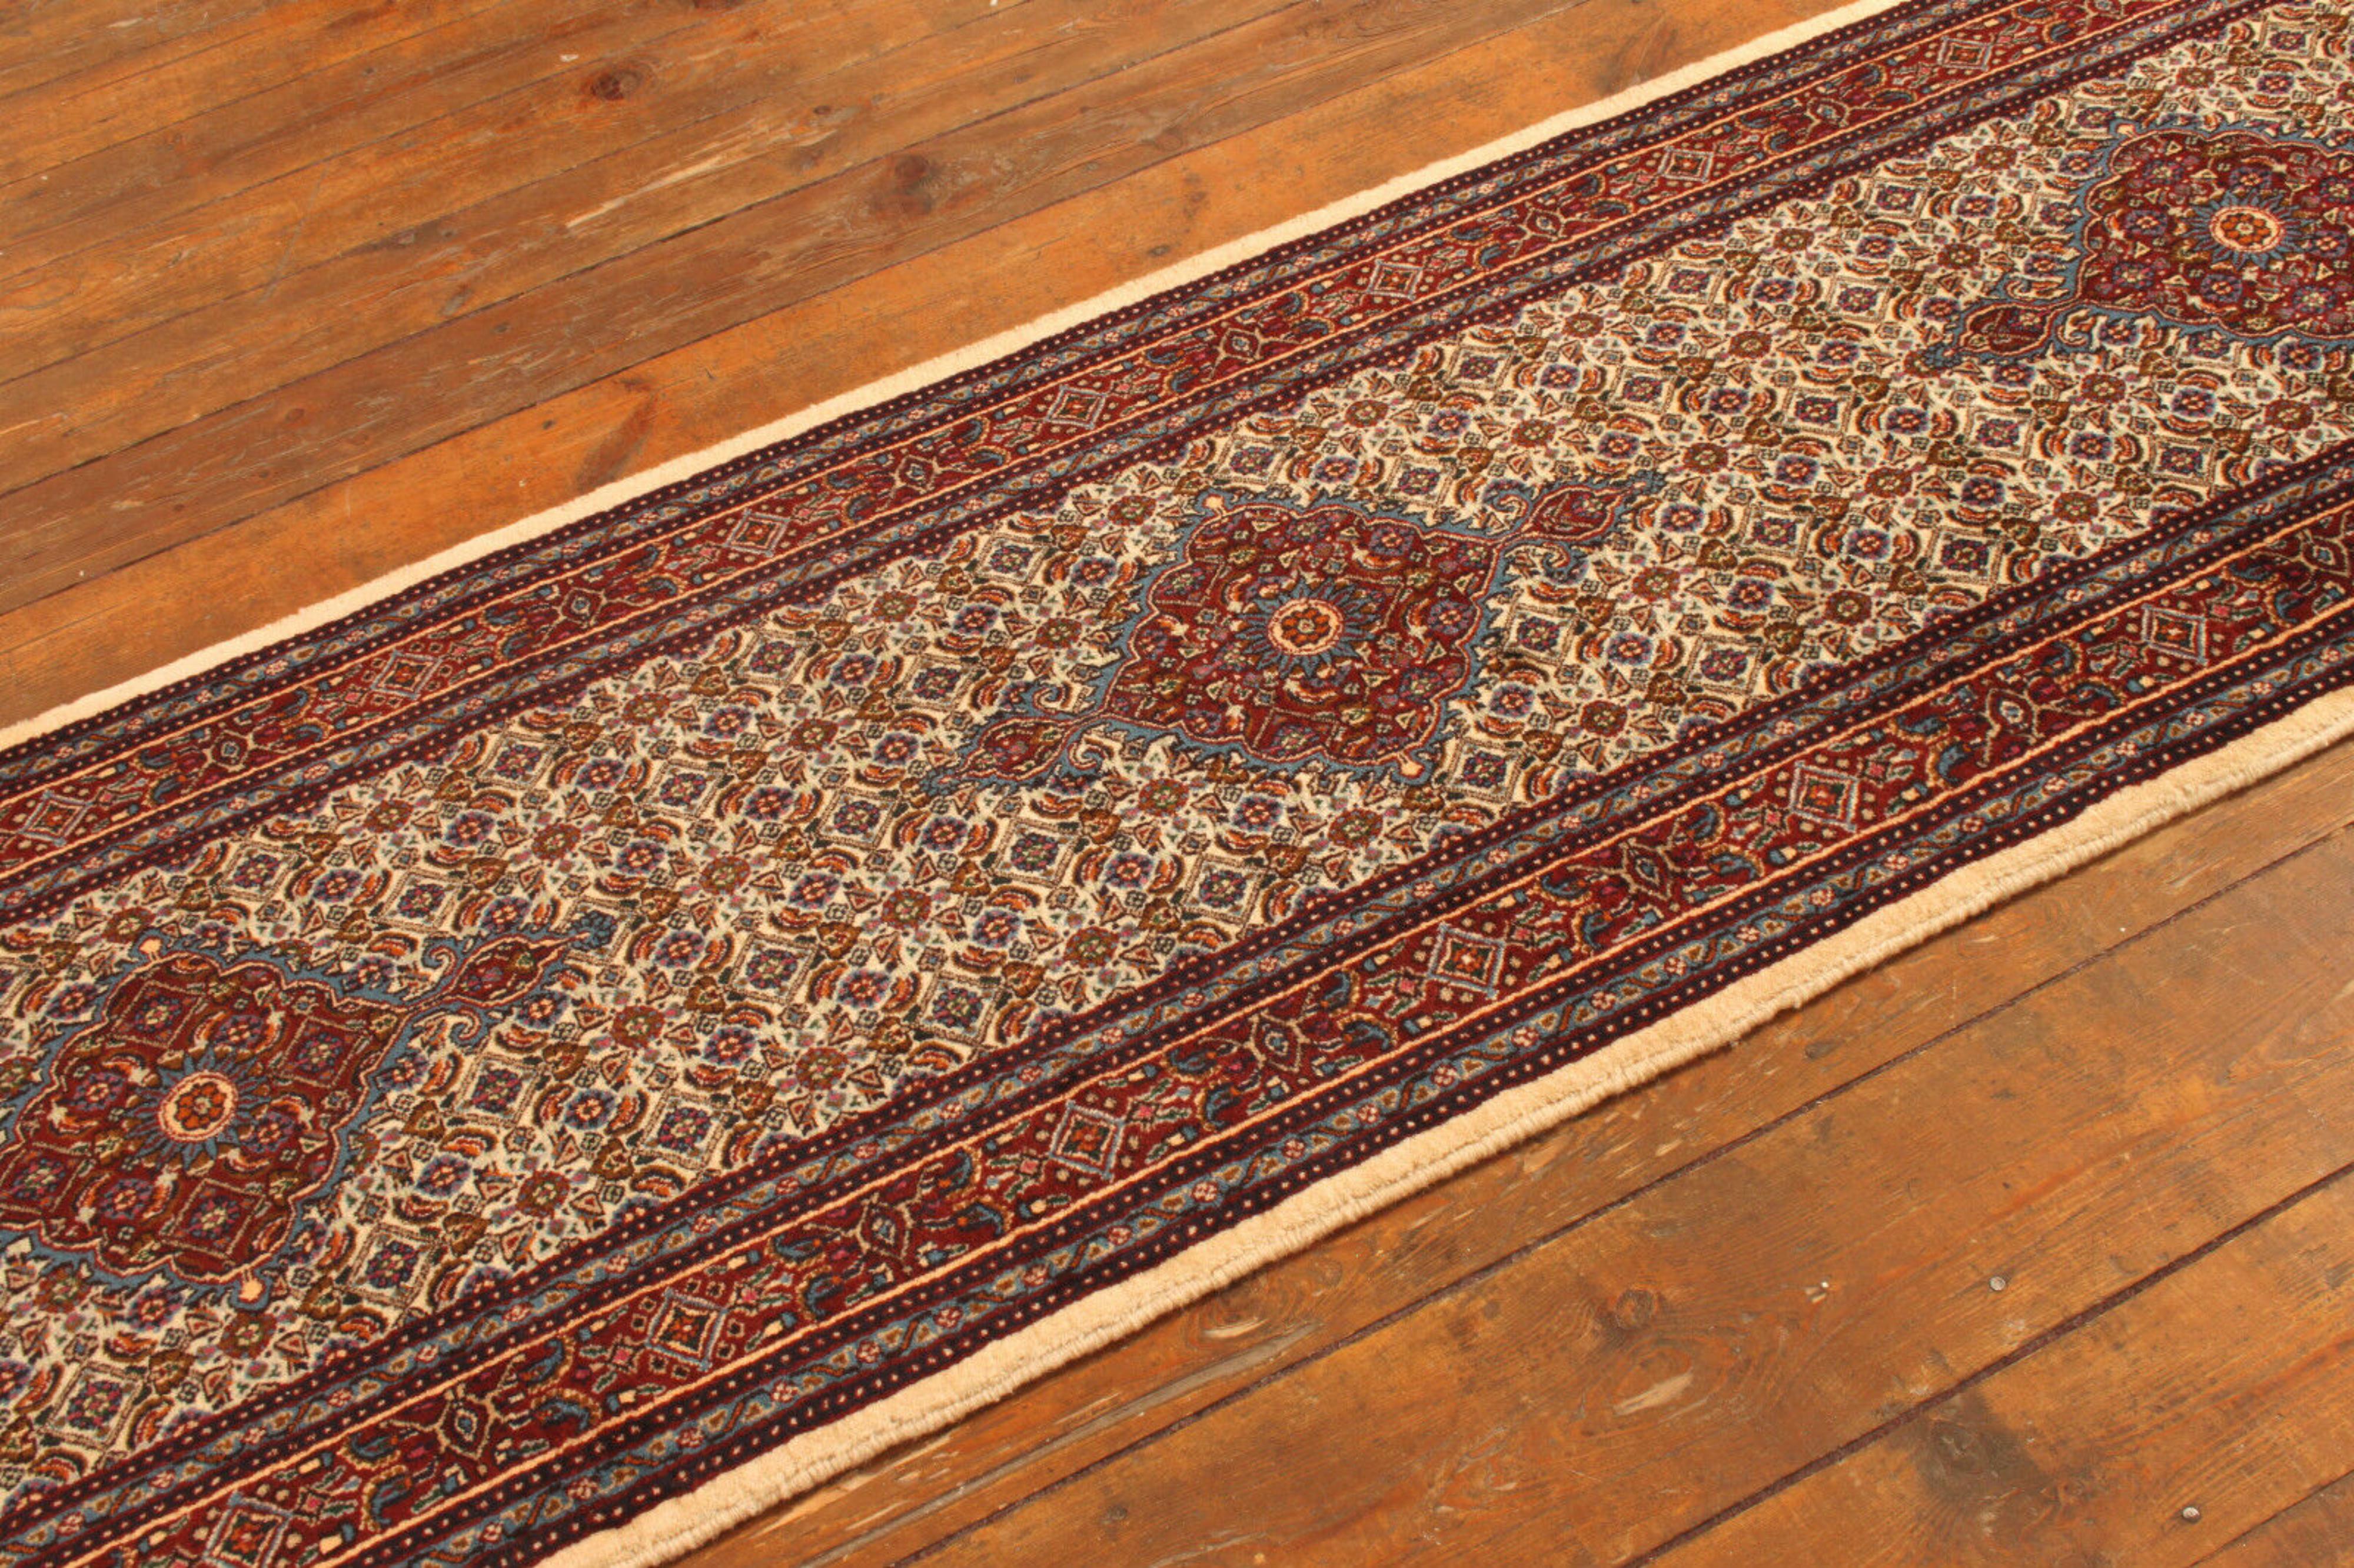 Handmade Vintage Persian Style Moud Runner Rug 2.6' x 9.6', 1980s - 1T51 For Sale 2